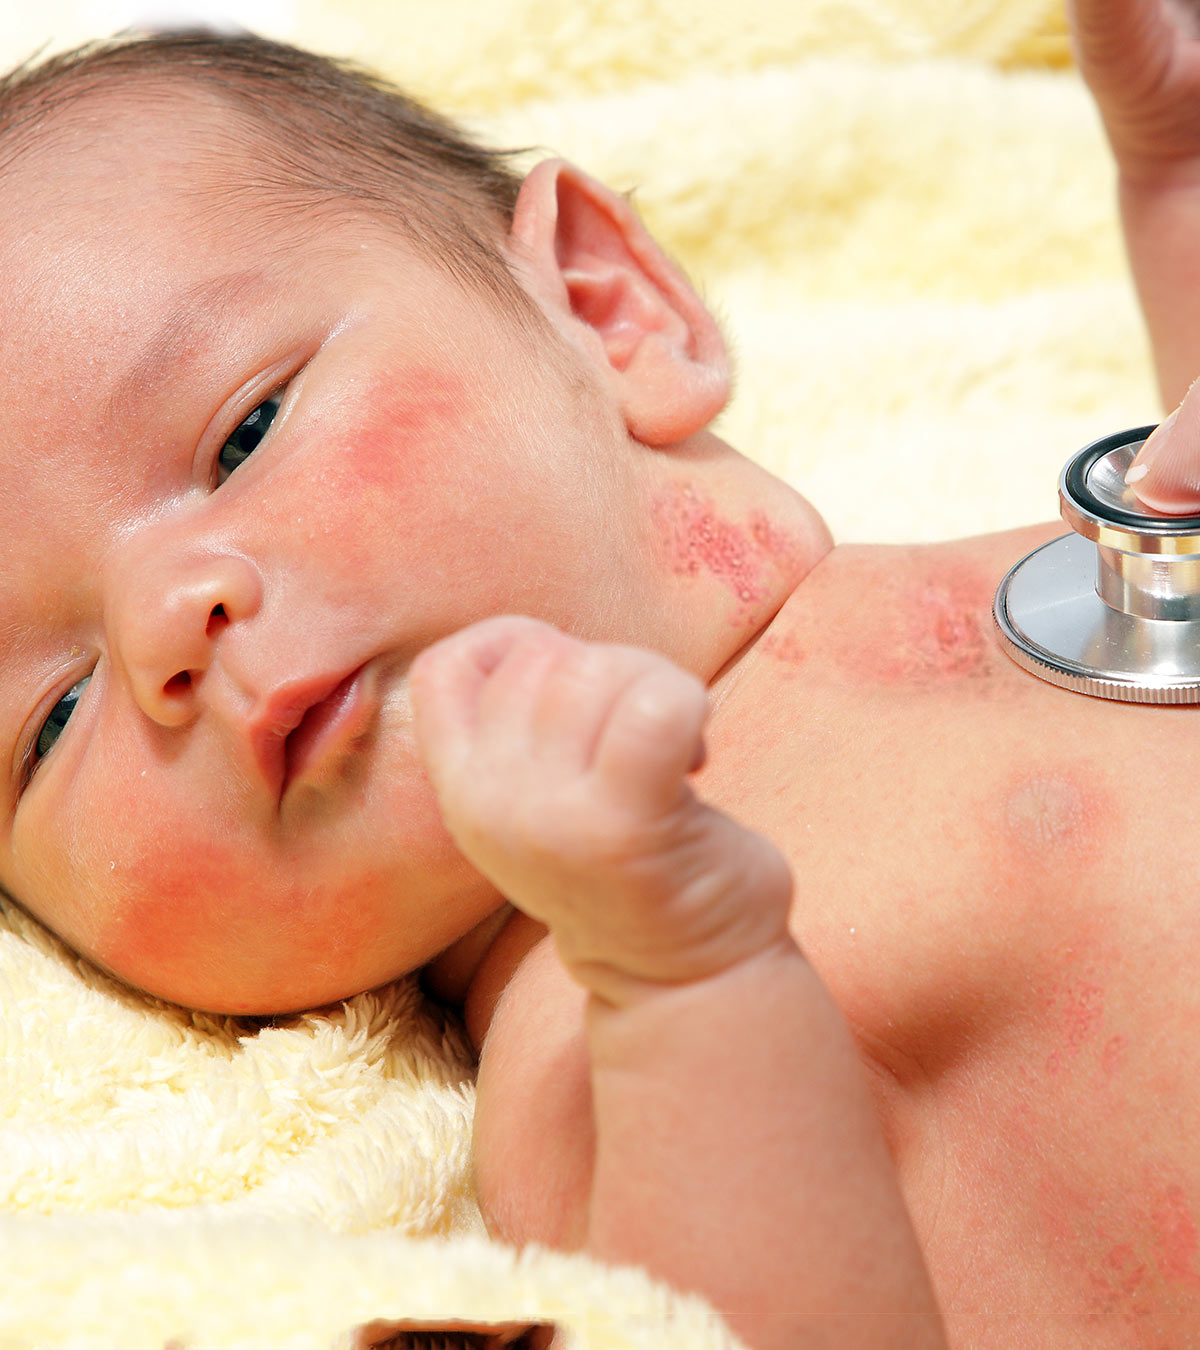 Shingles In Babies: Symptoms, Causes, Diagnosis & Treatment